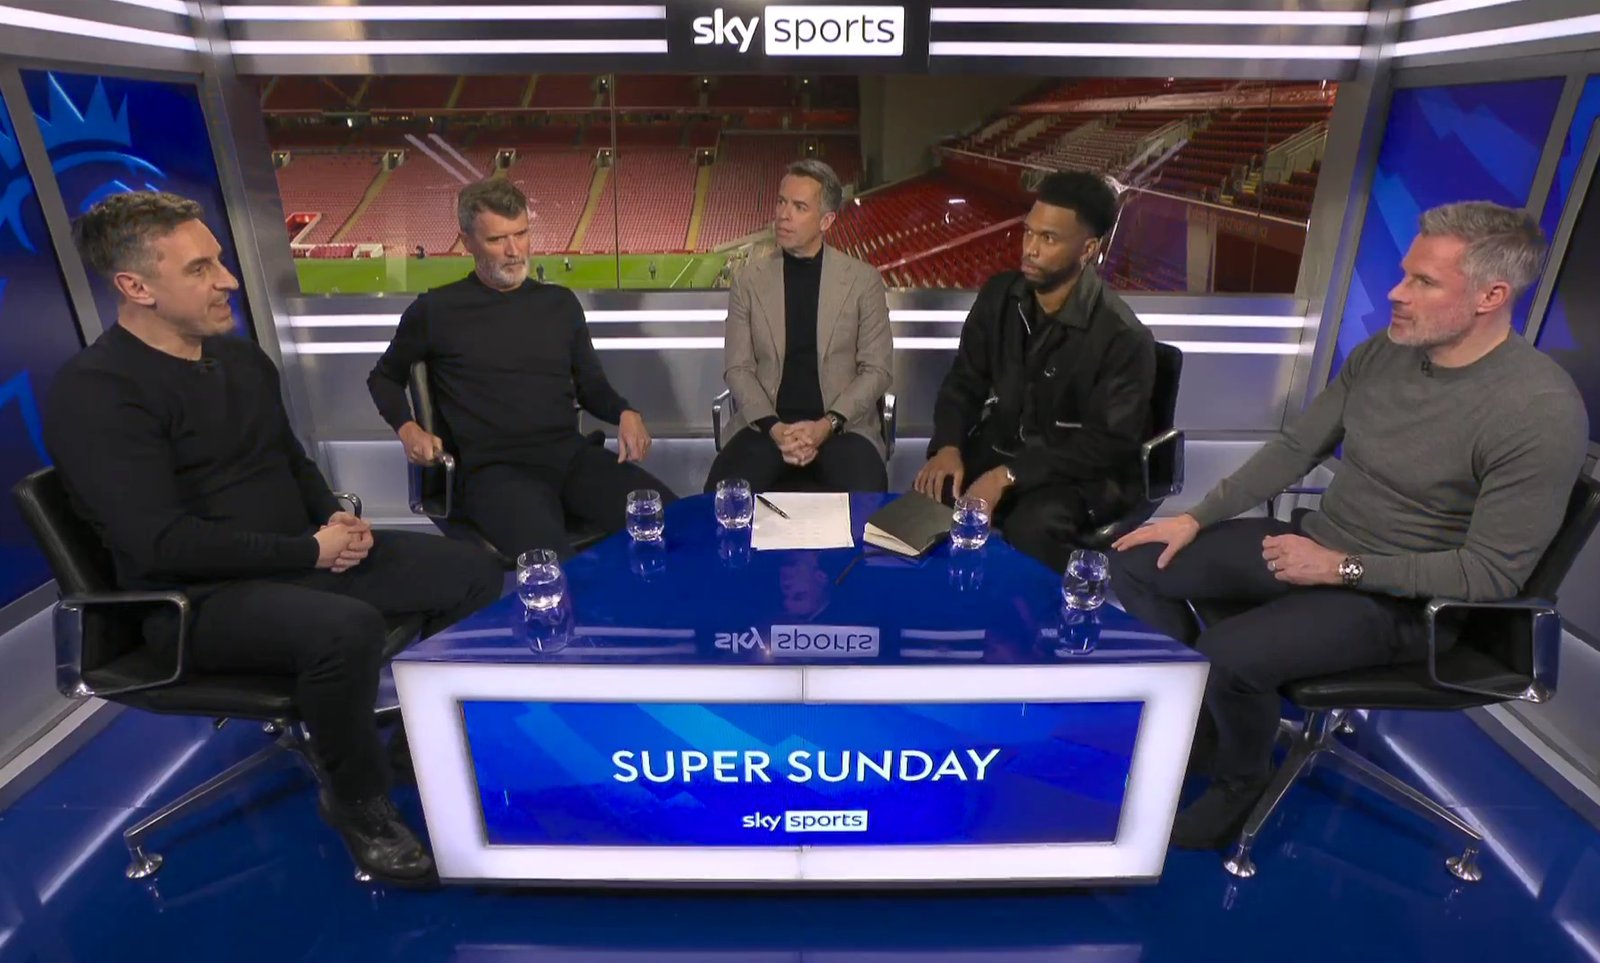 Gary Neville & Jamie Carragher just agreed on Liverpool’s title chances after Man Utd draw